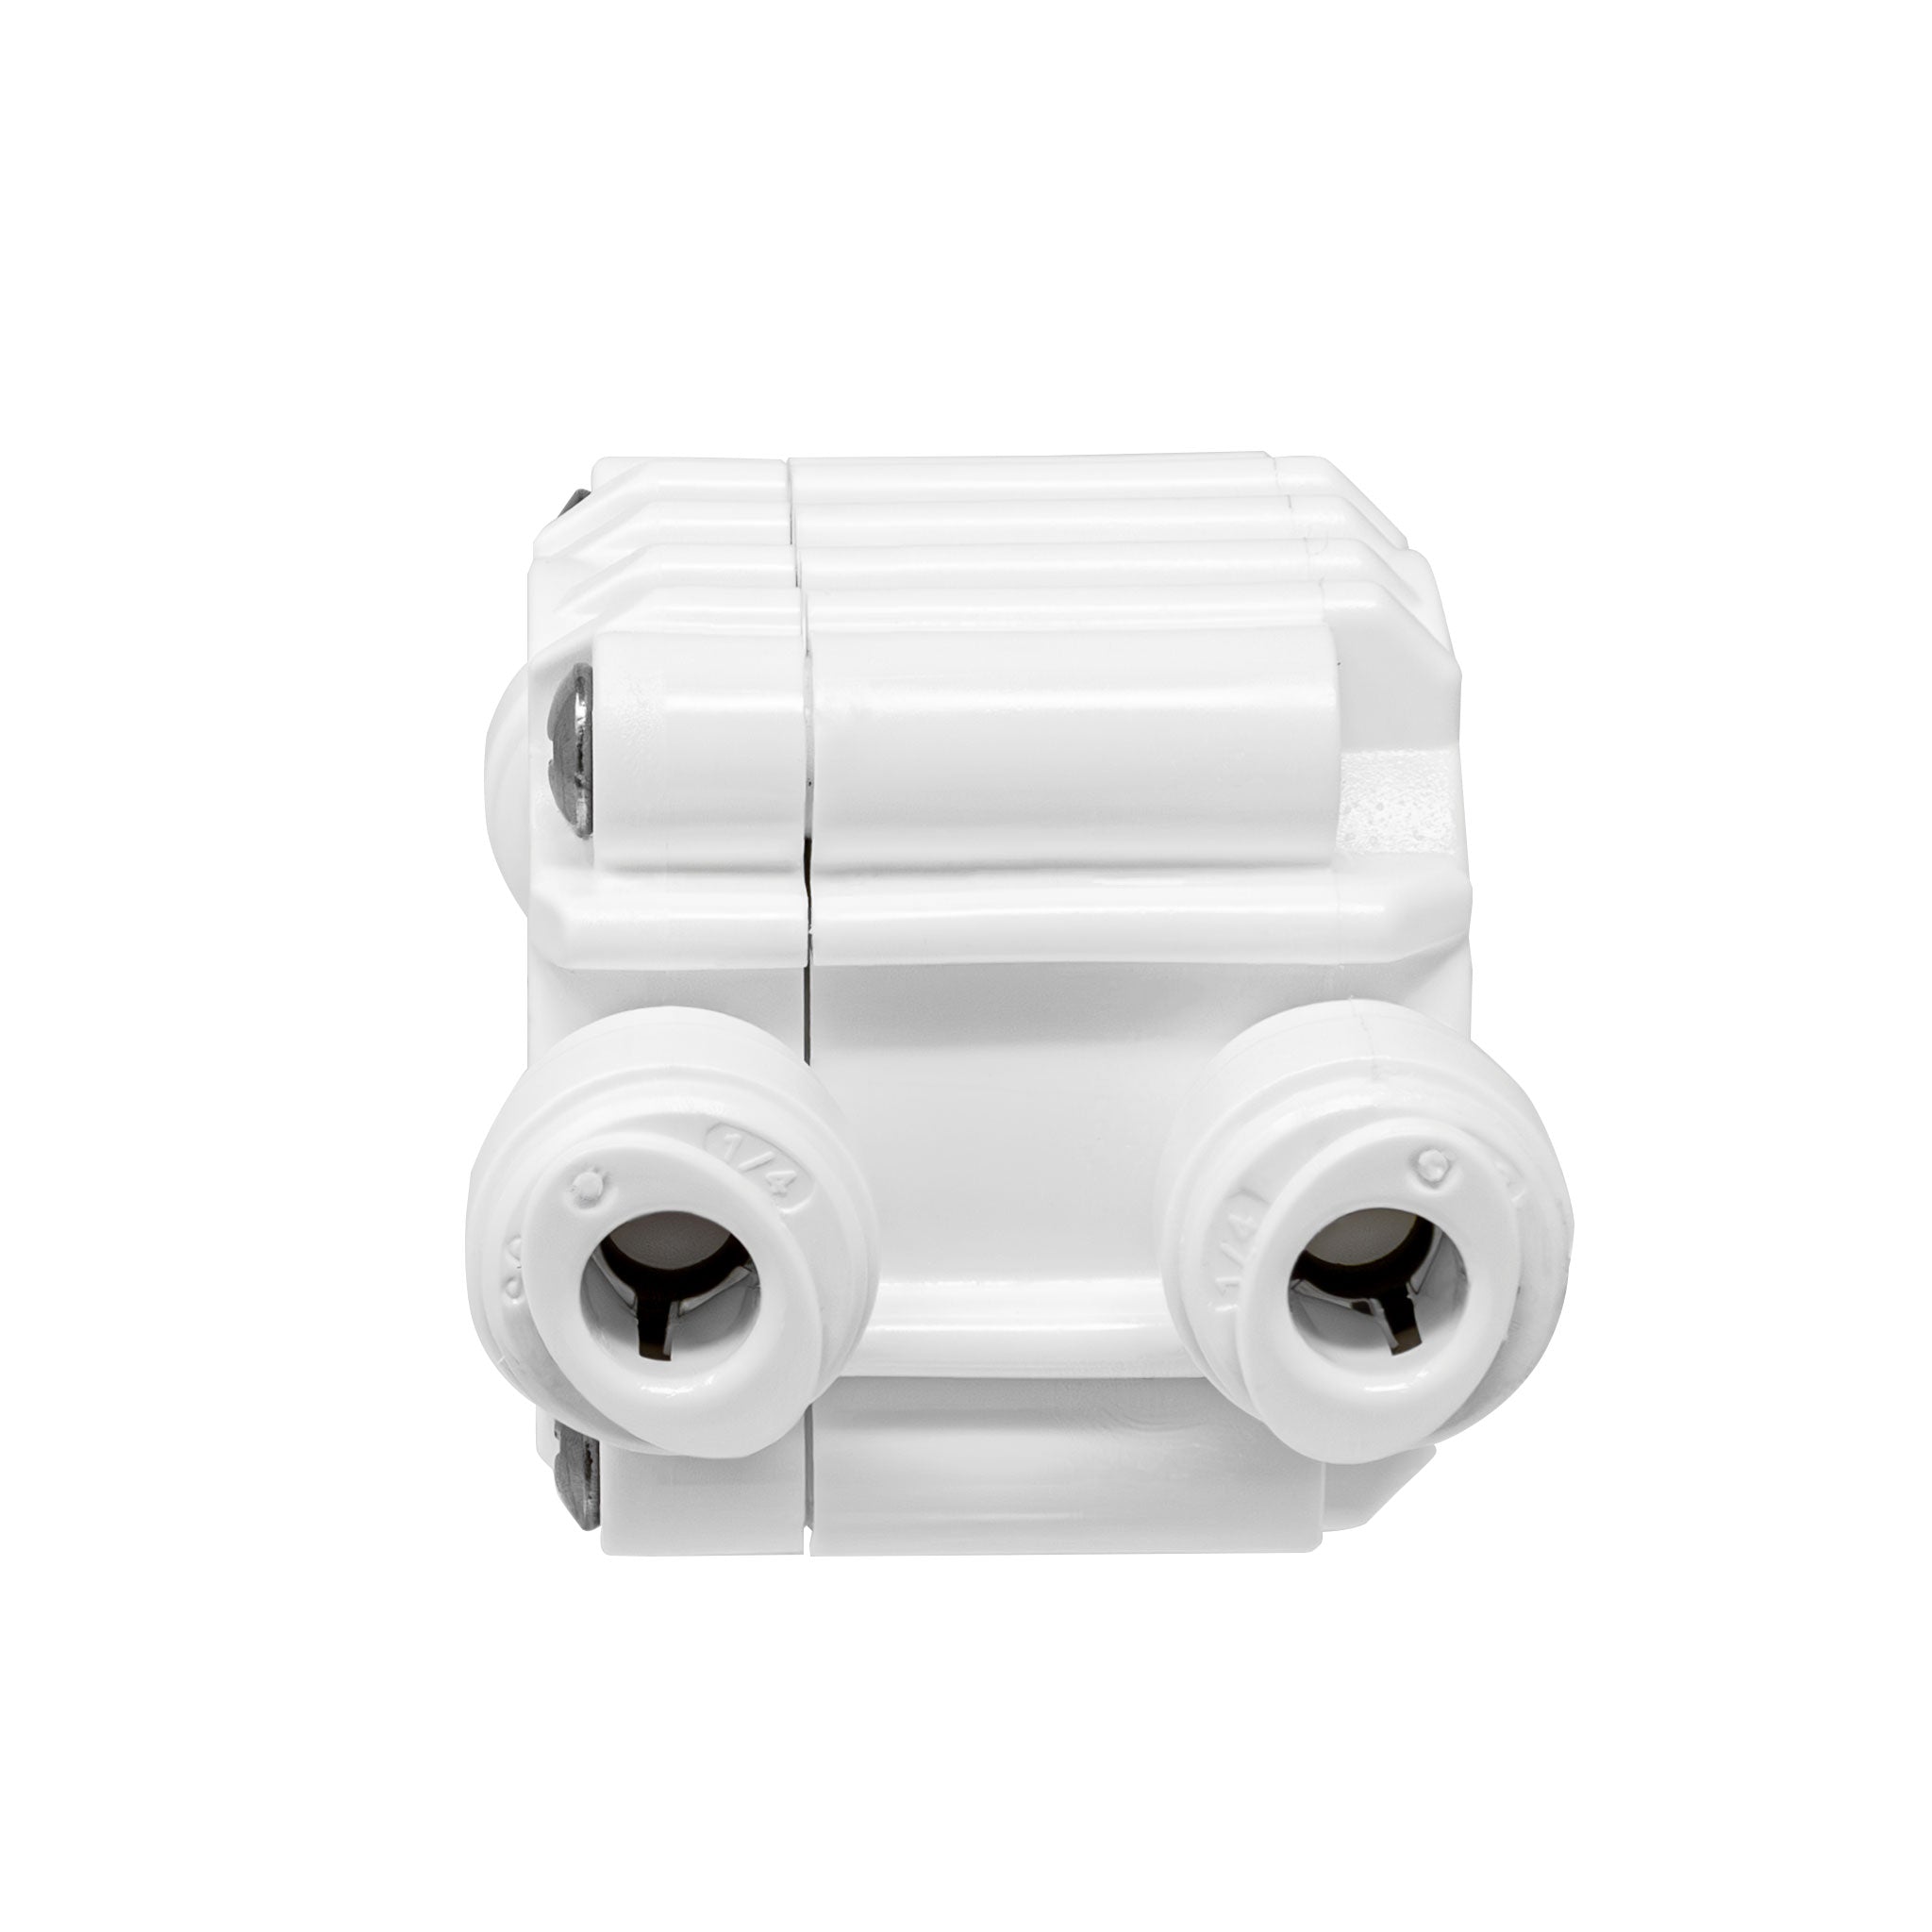 1/4" Auto Shut Off Valve - 4 Port Quick Connect for Water Filtration Systems